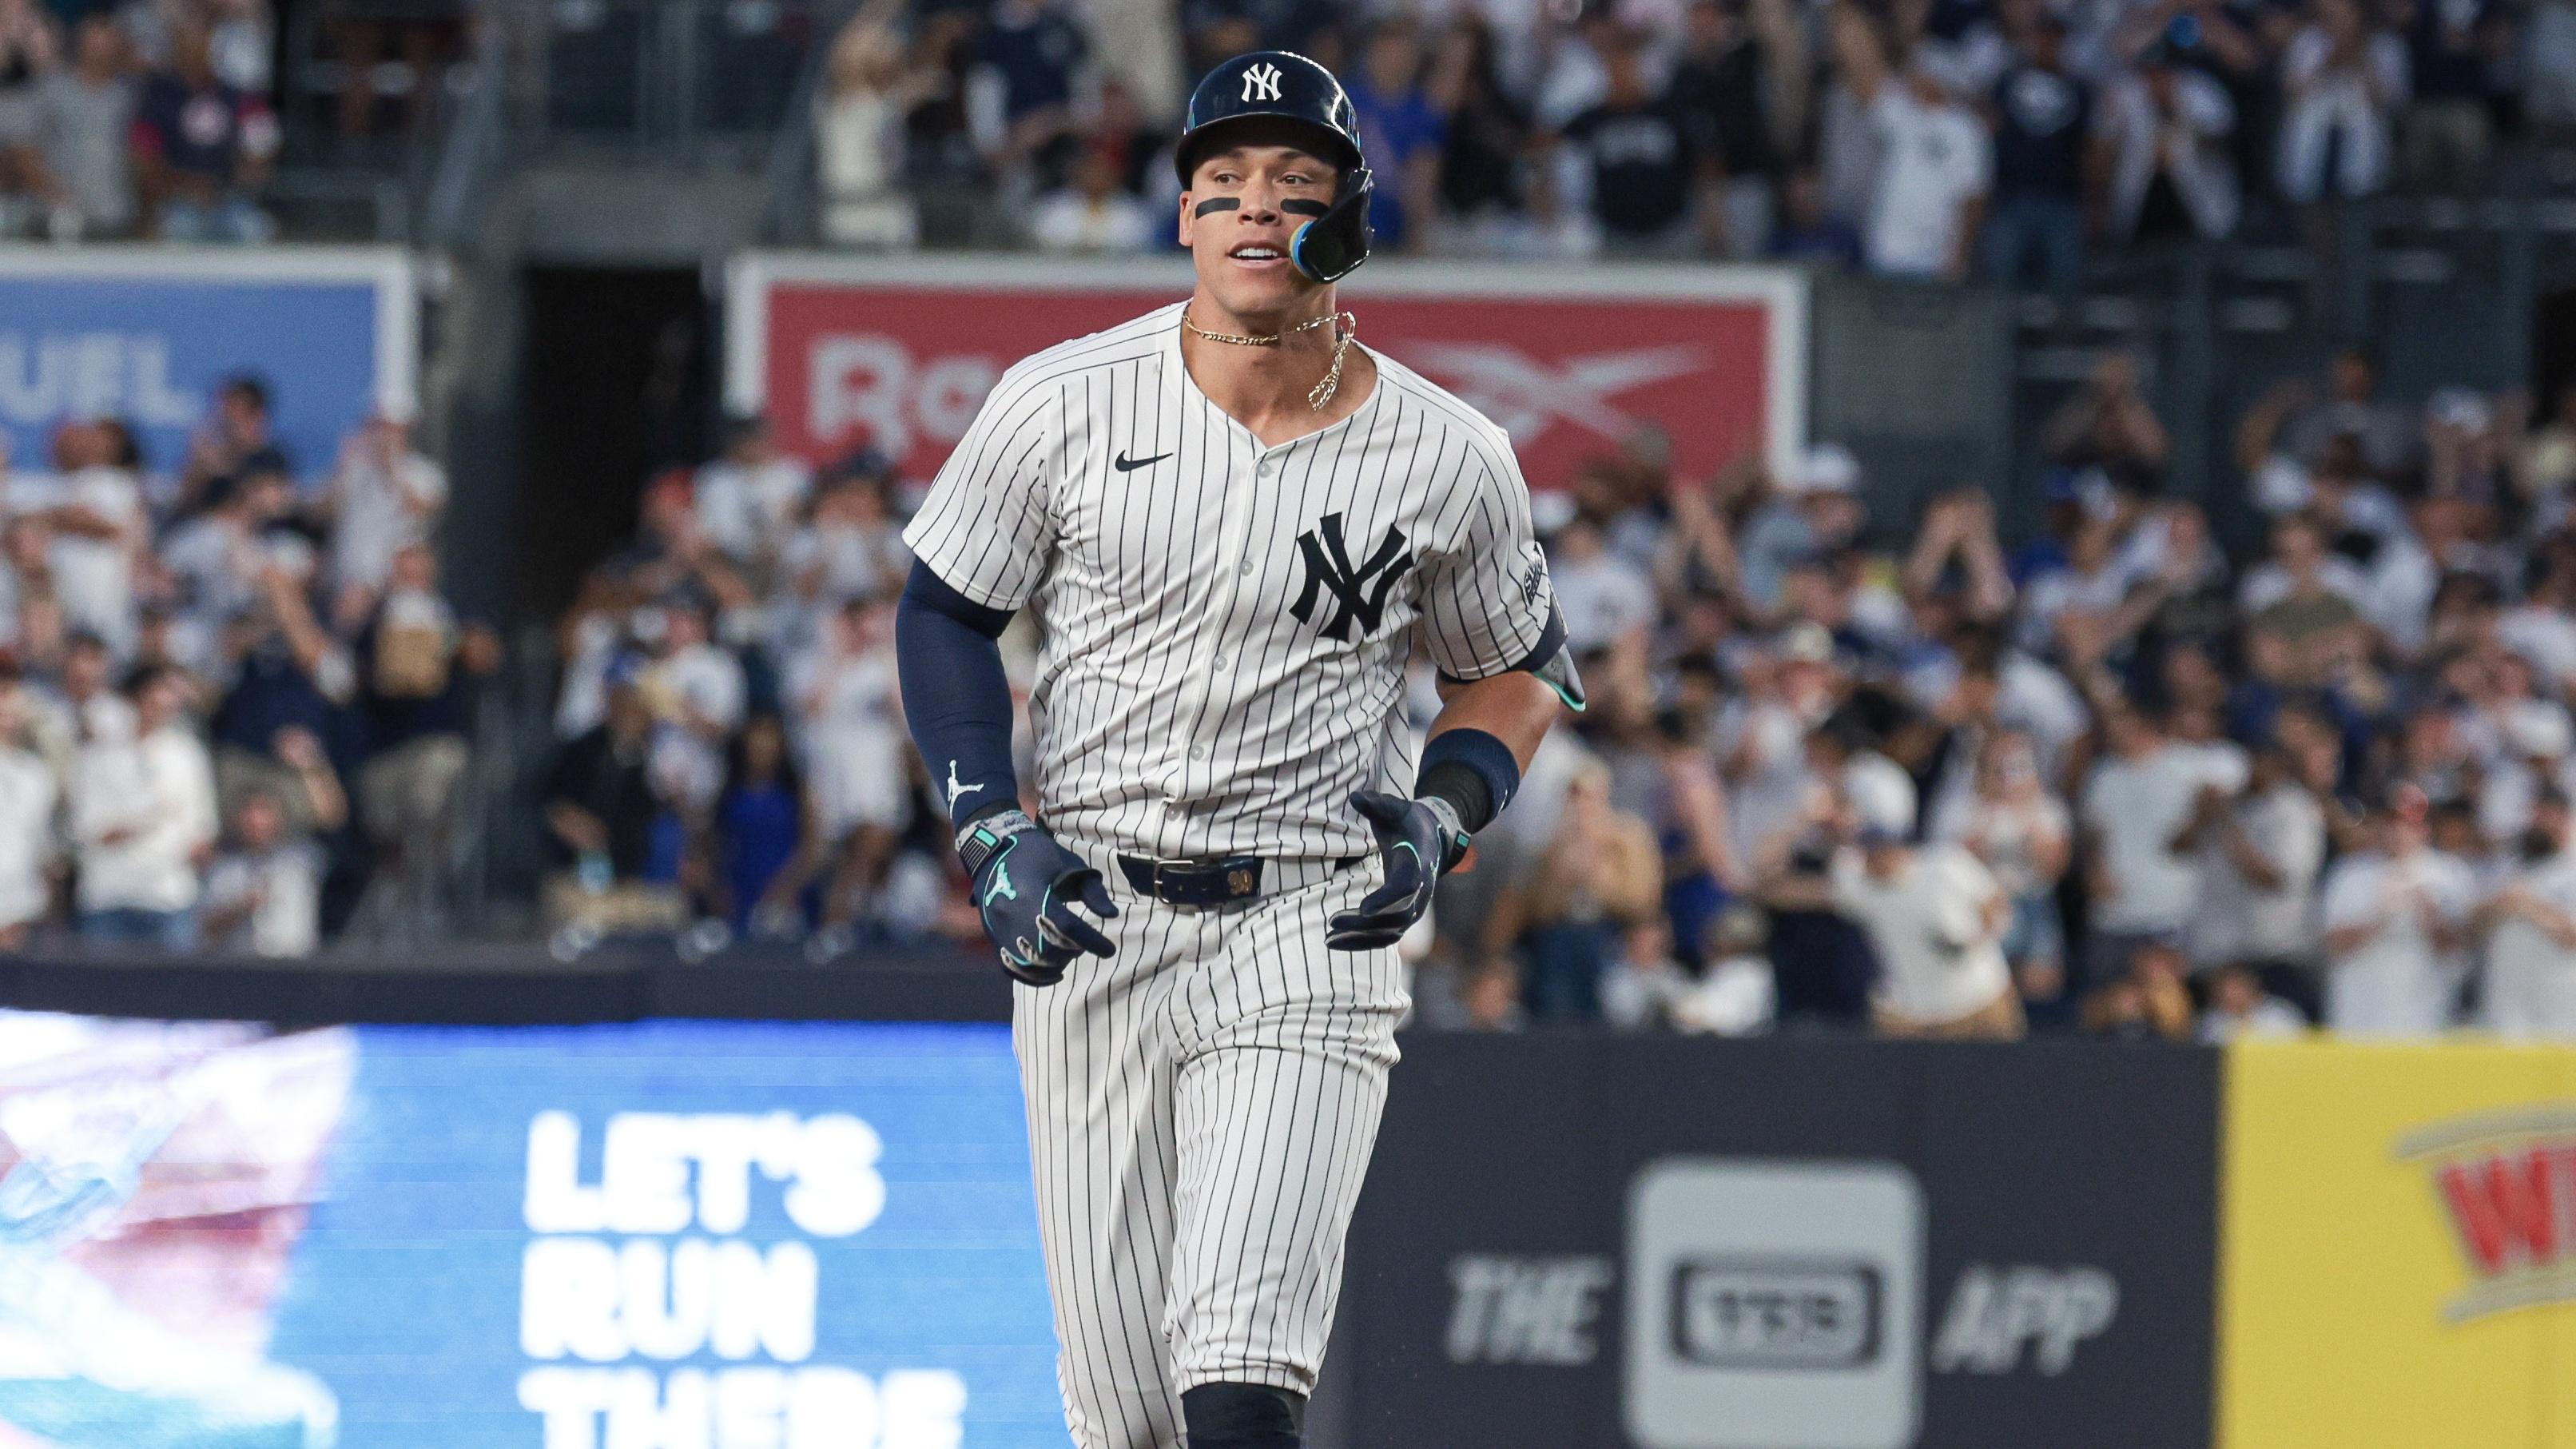 Aaron Judge returns to Yankees' lineup after HBP, still has some 'discomfort'